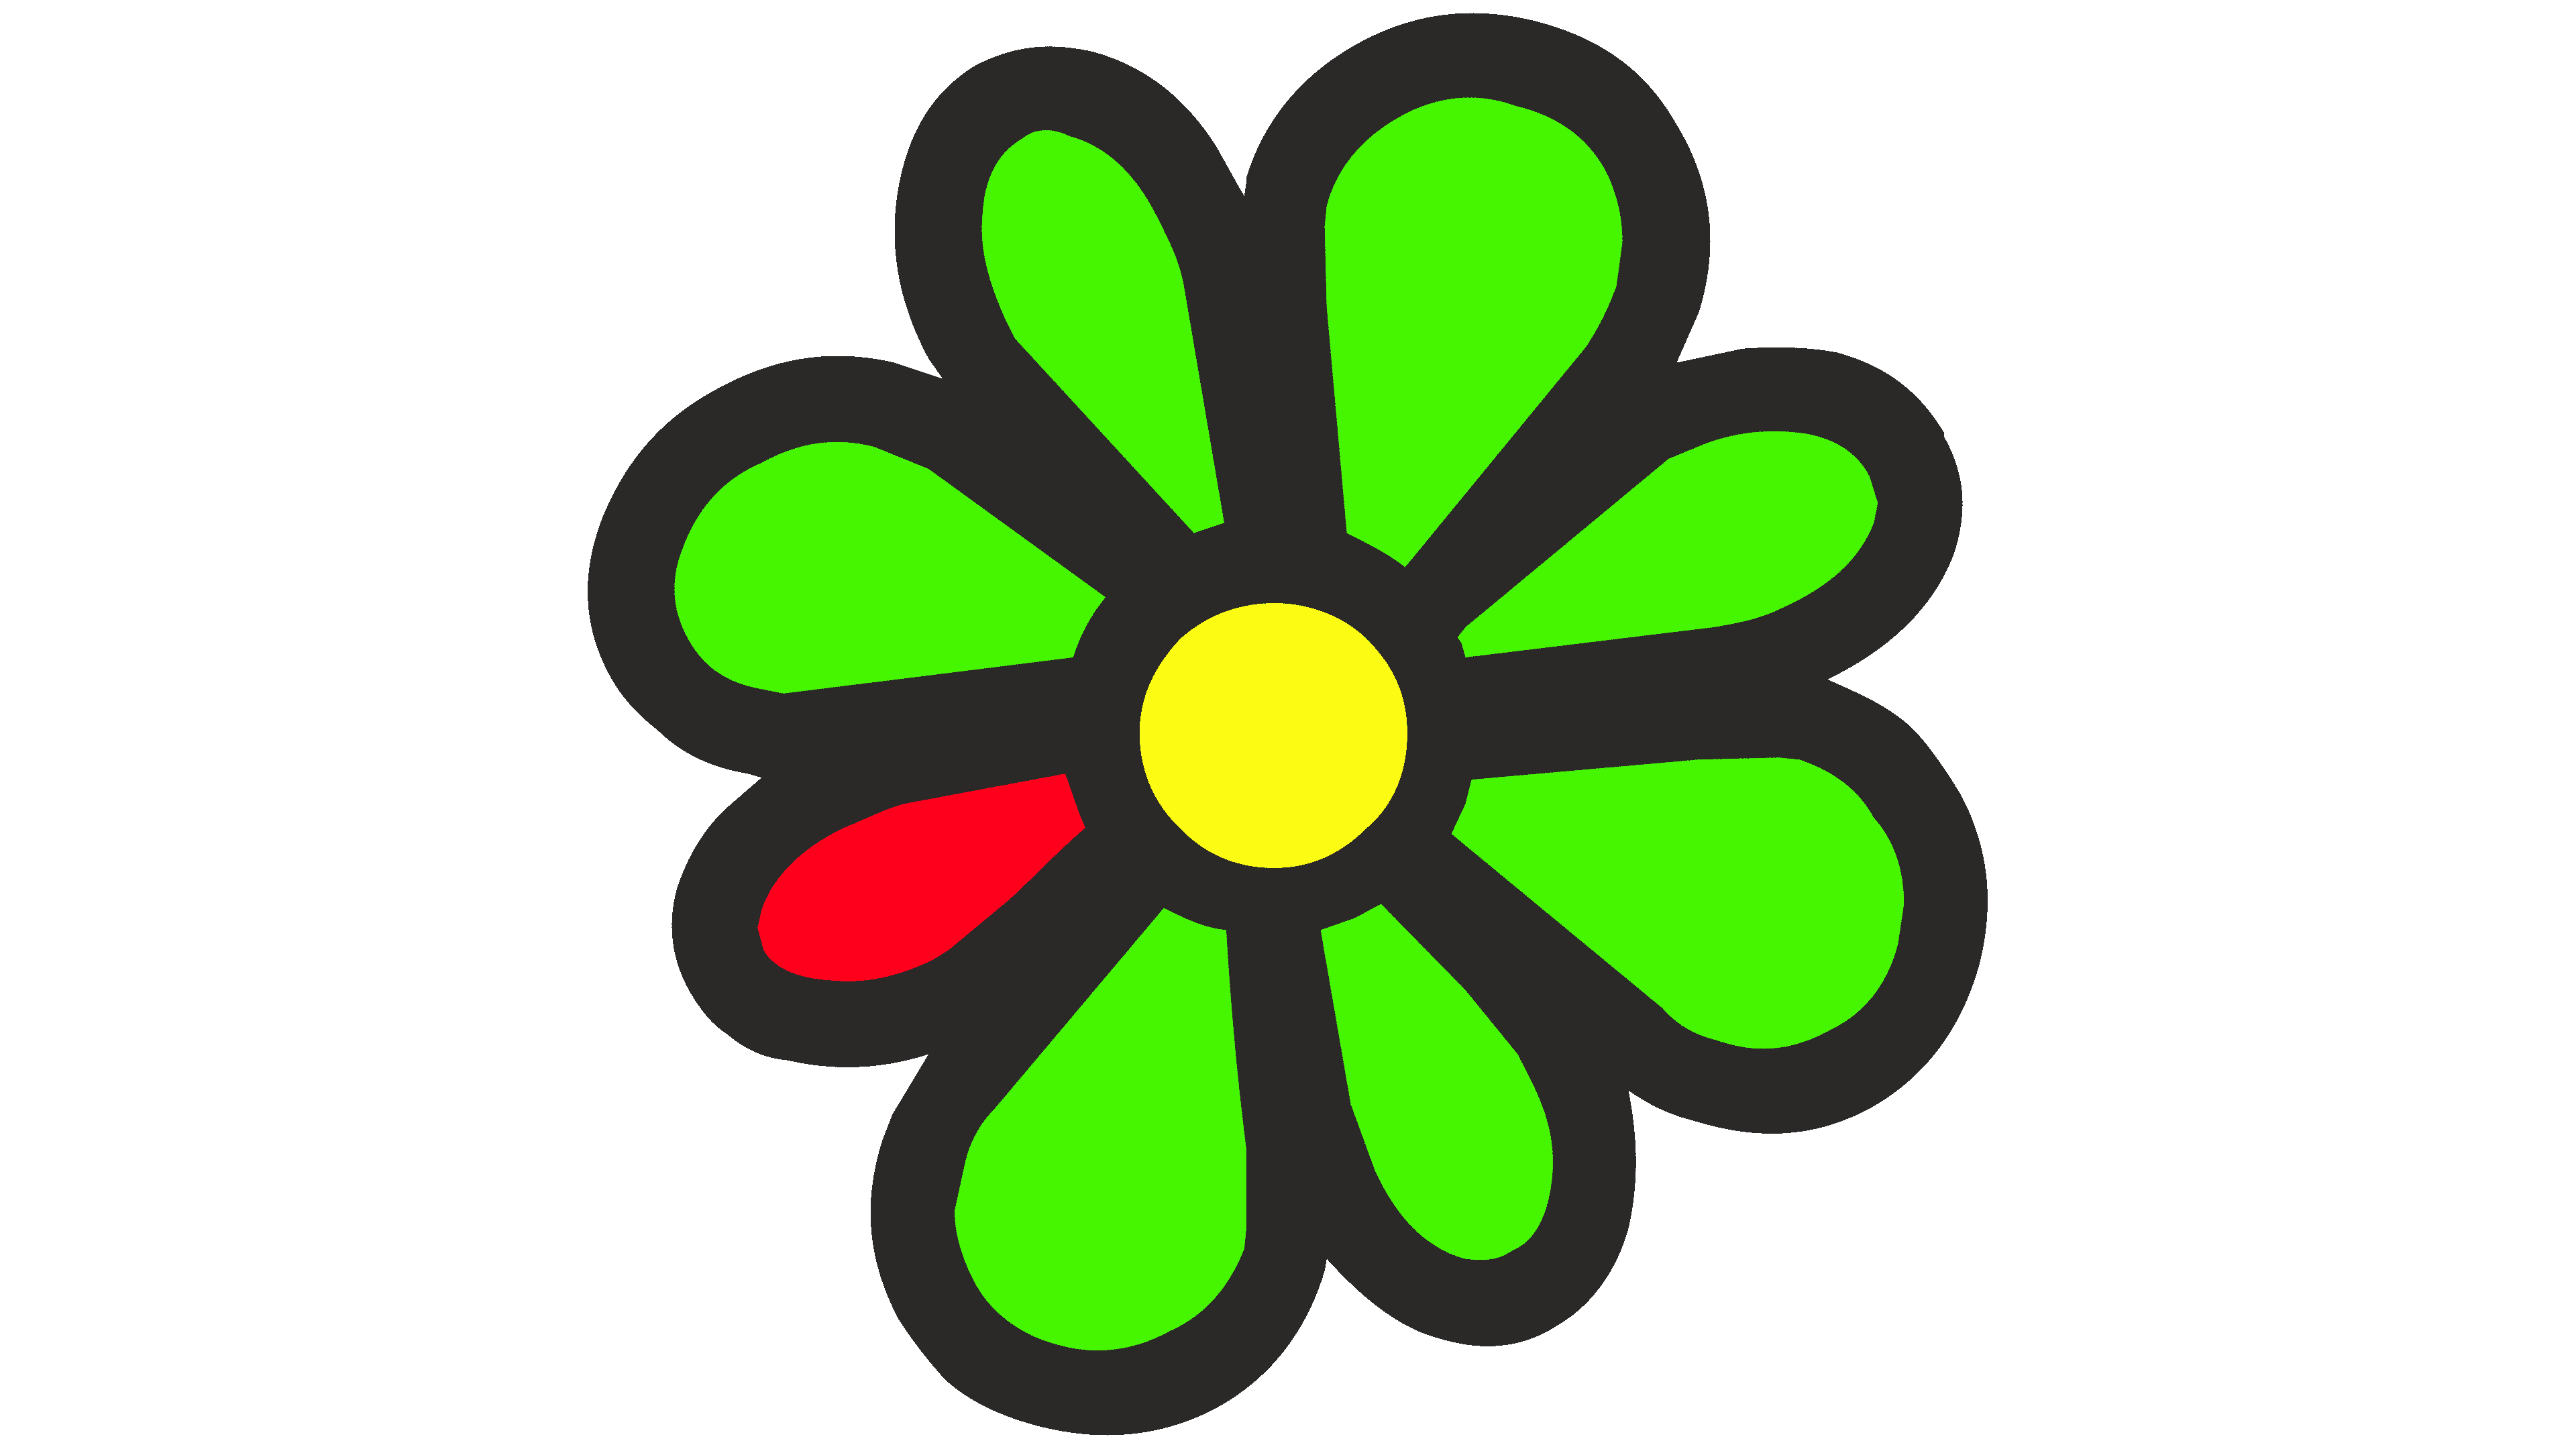 ICQ Messenger Launches Open Platform for Stickers, by Dimitry O. Photo